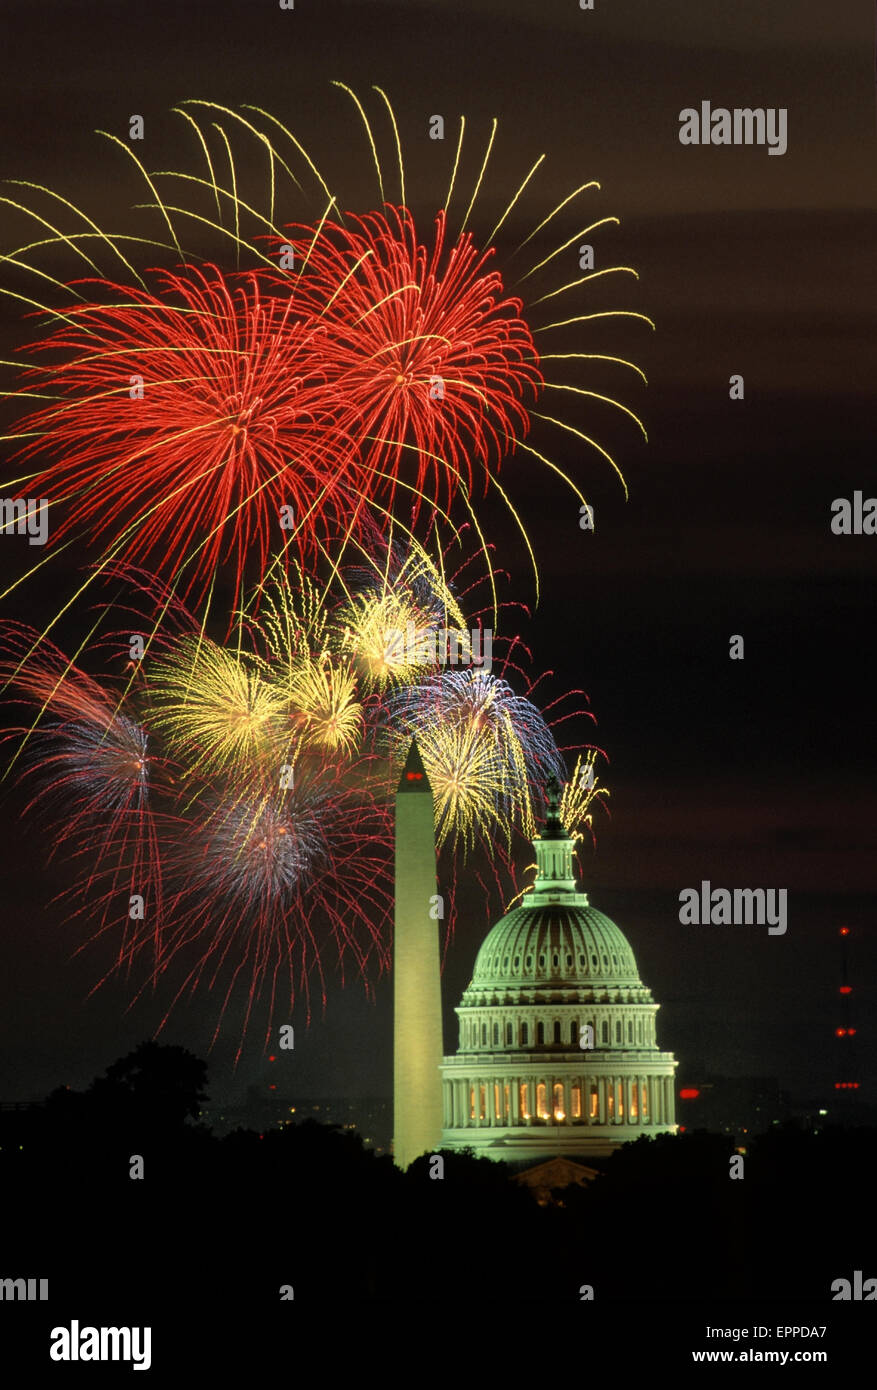 Washington DC. July 4th Fireworks explode in the sky over the